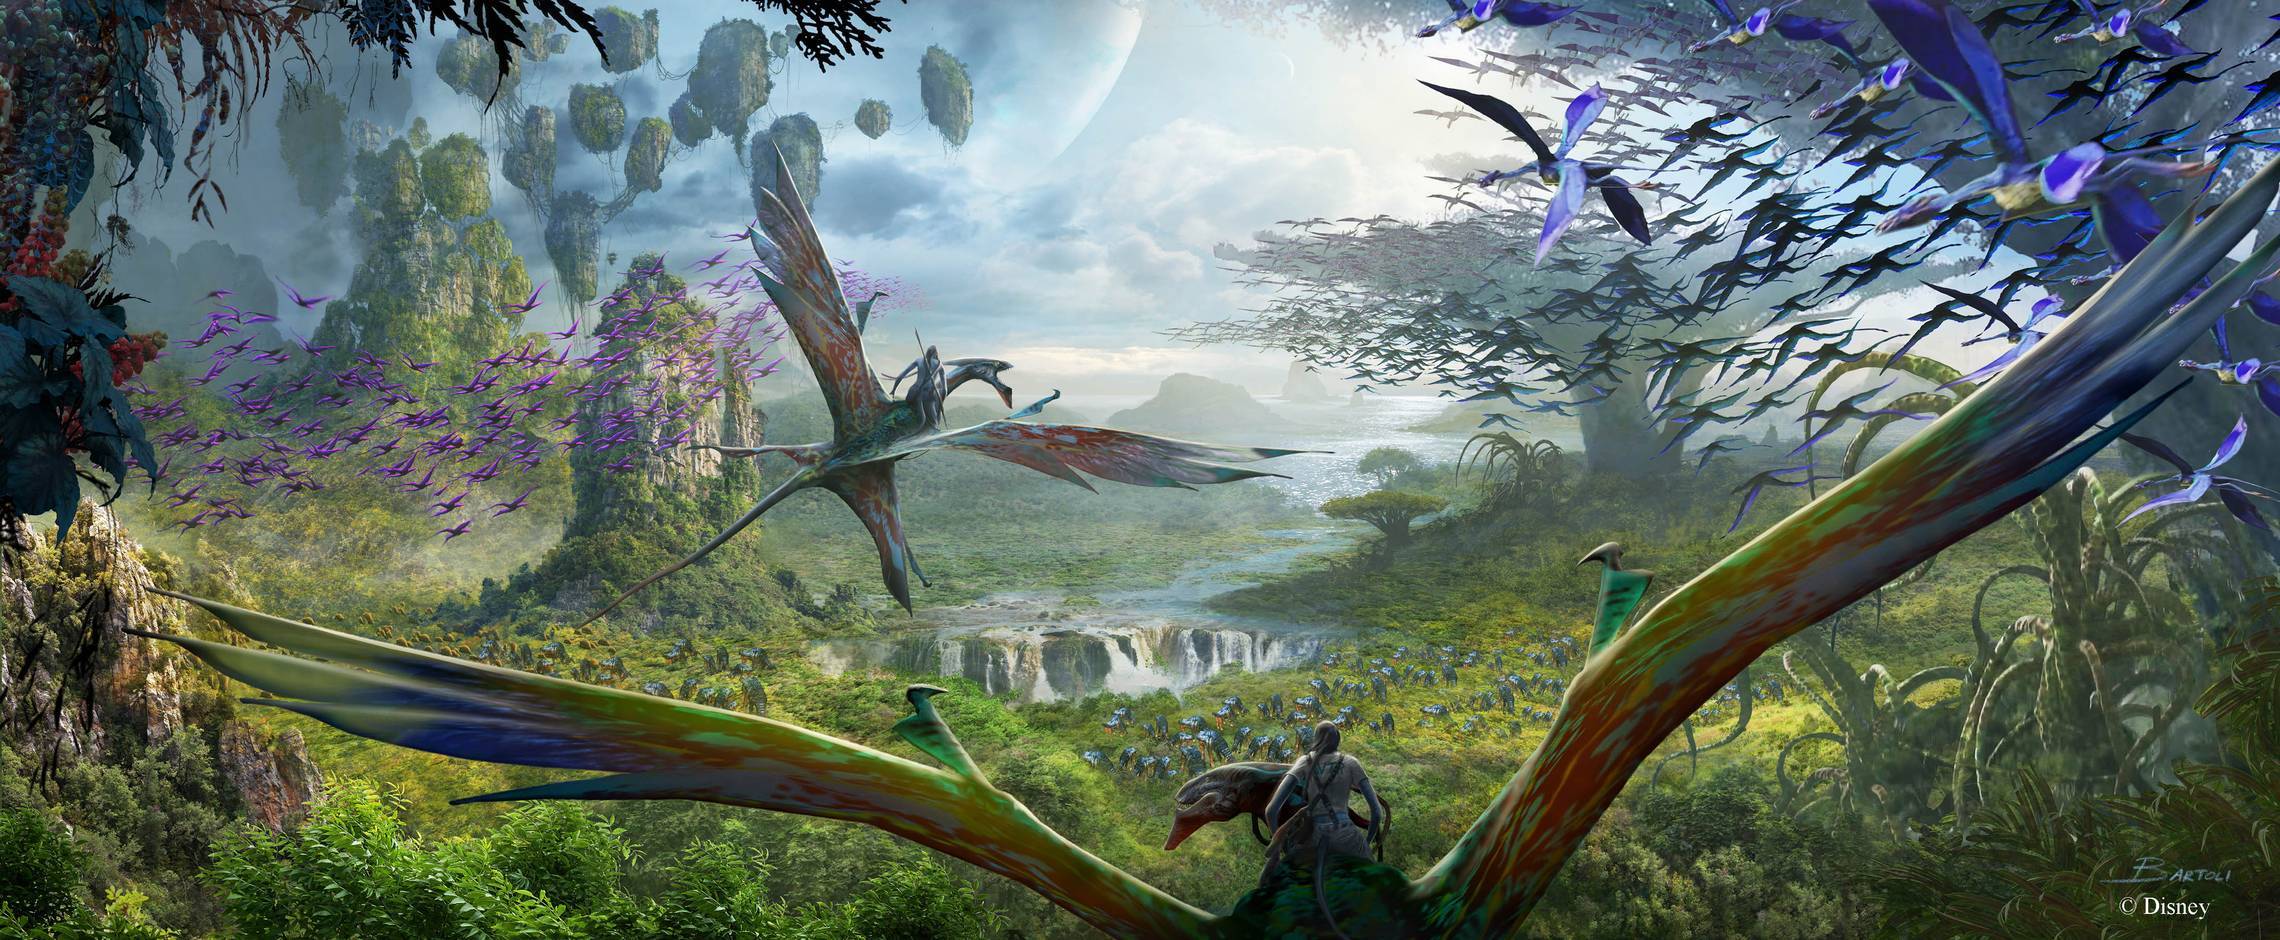 Avatar experience announced for Disneyland in California